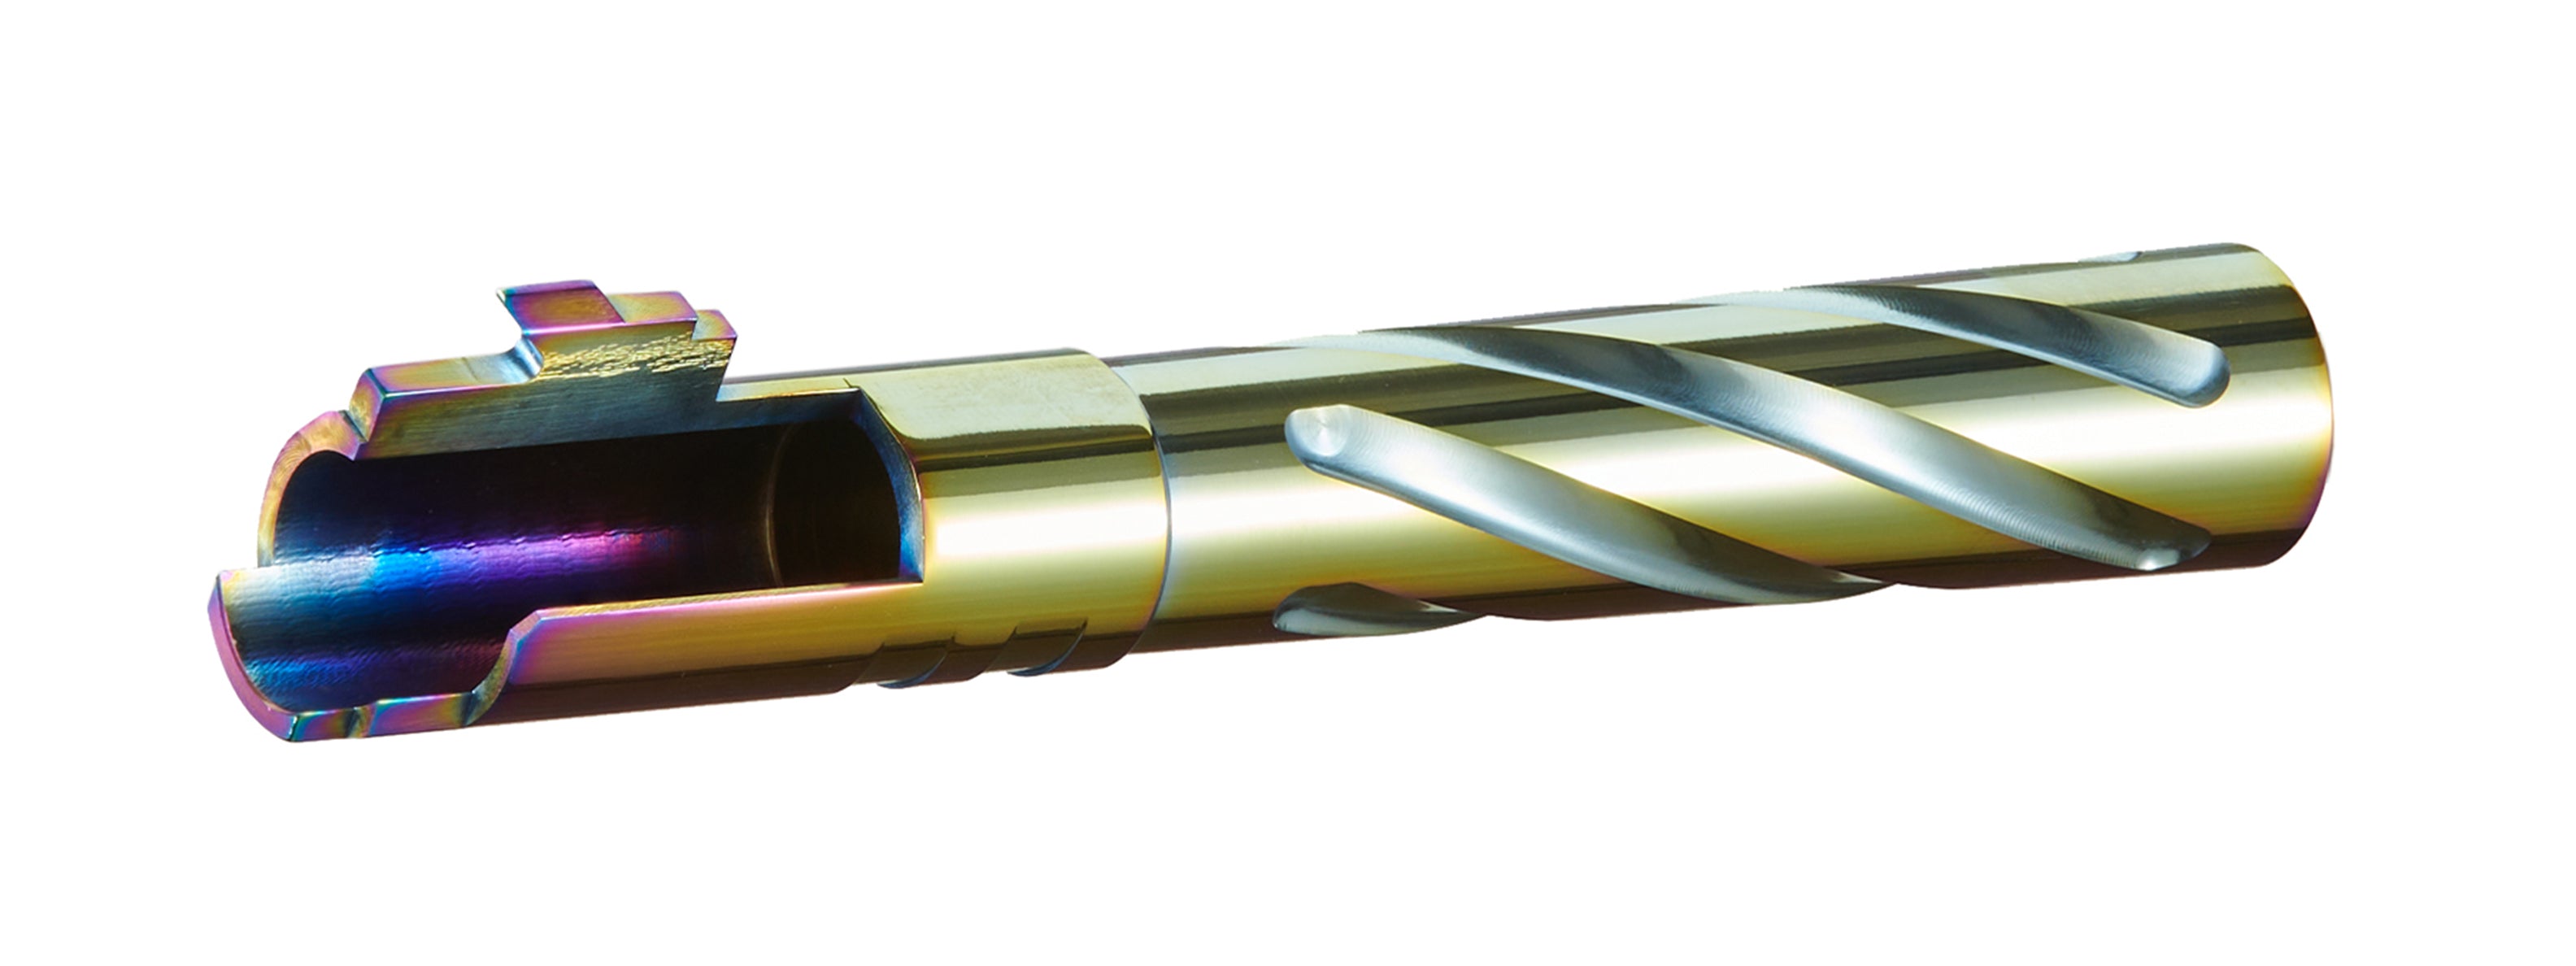 Lancer Tactical Stainless Steel Fluted Treaded 5.1 Outer Barrel for Hi-Capa - ssairsoft.com